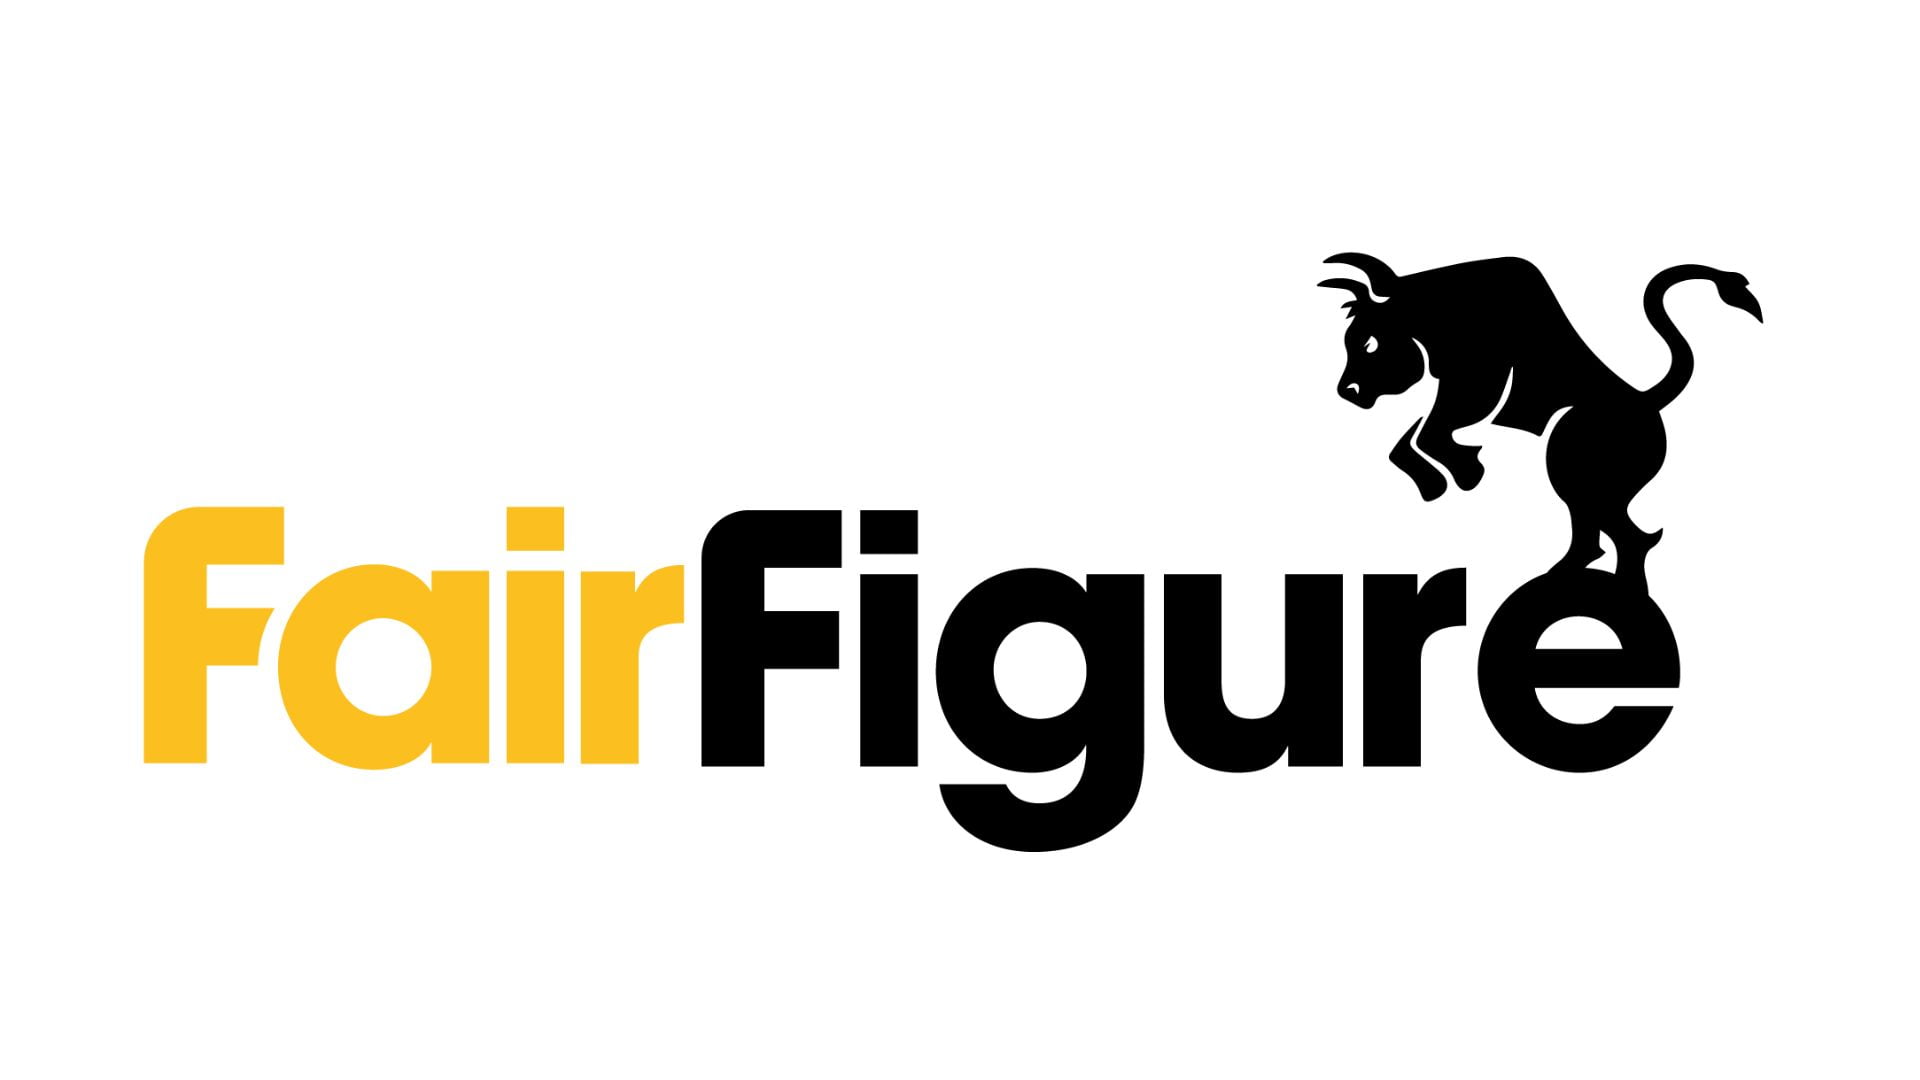 FairFigure Teams Up with Equifax to Upgrade Business Credit Scoring System